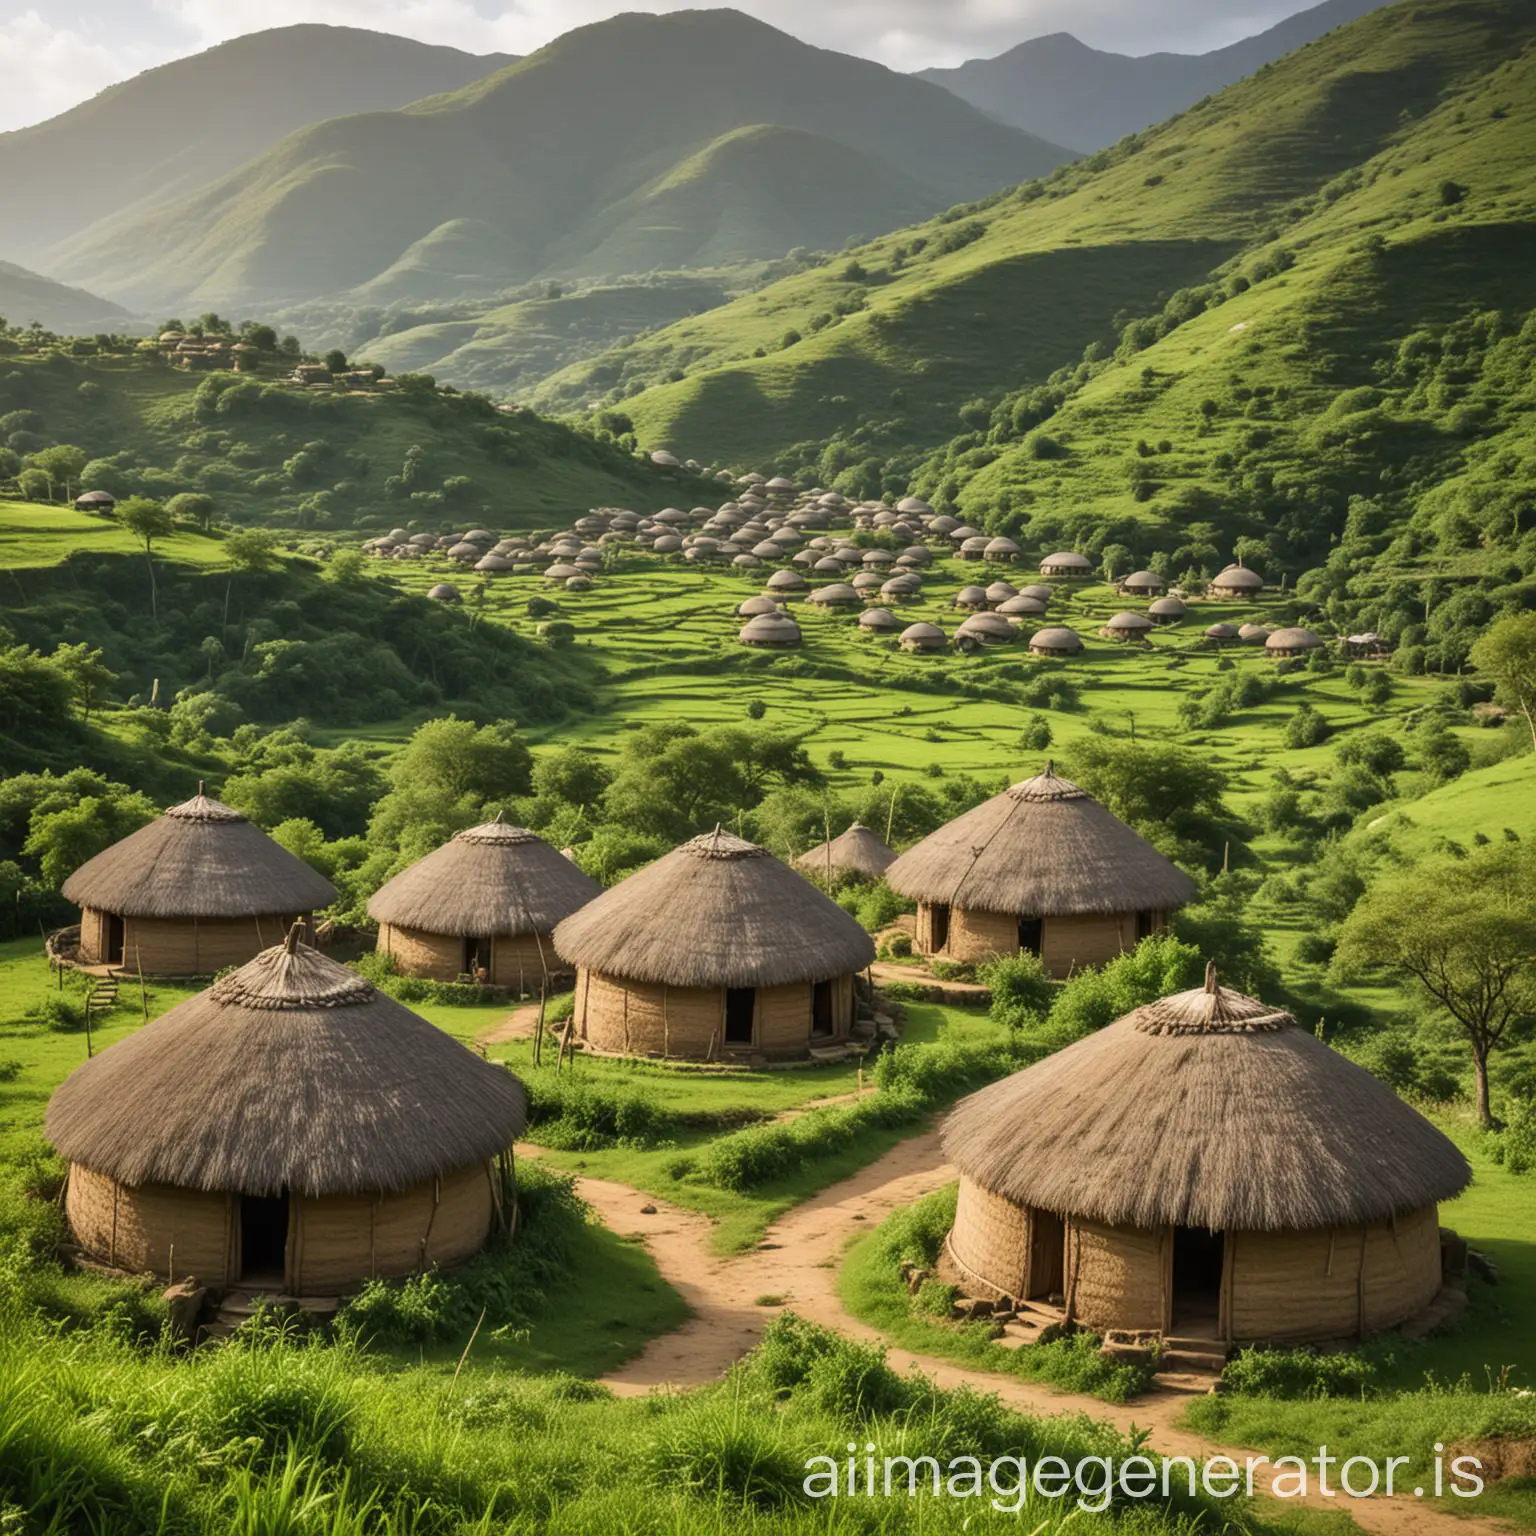 A beautiful Shona village with traditional round huts, lush green hills in the background